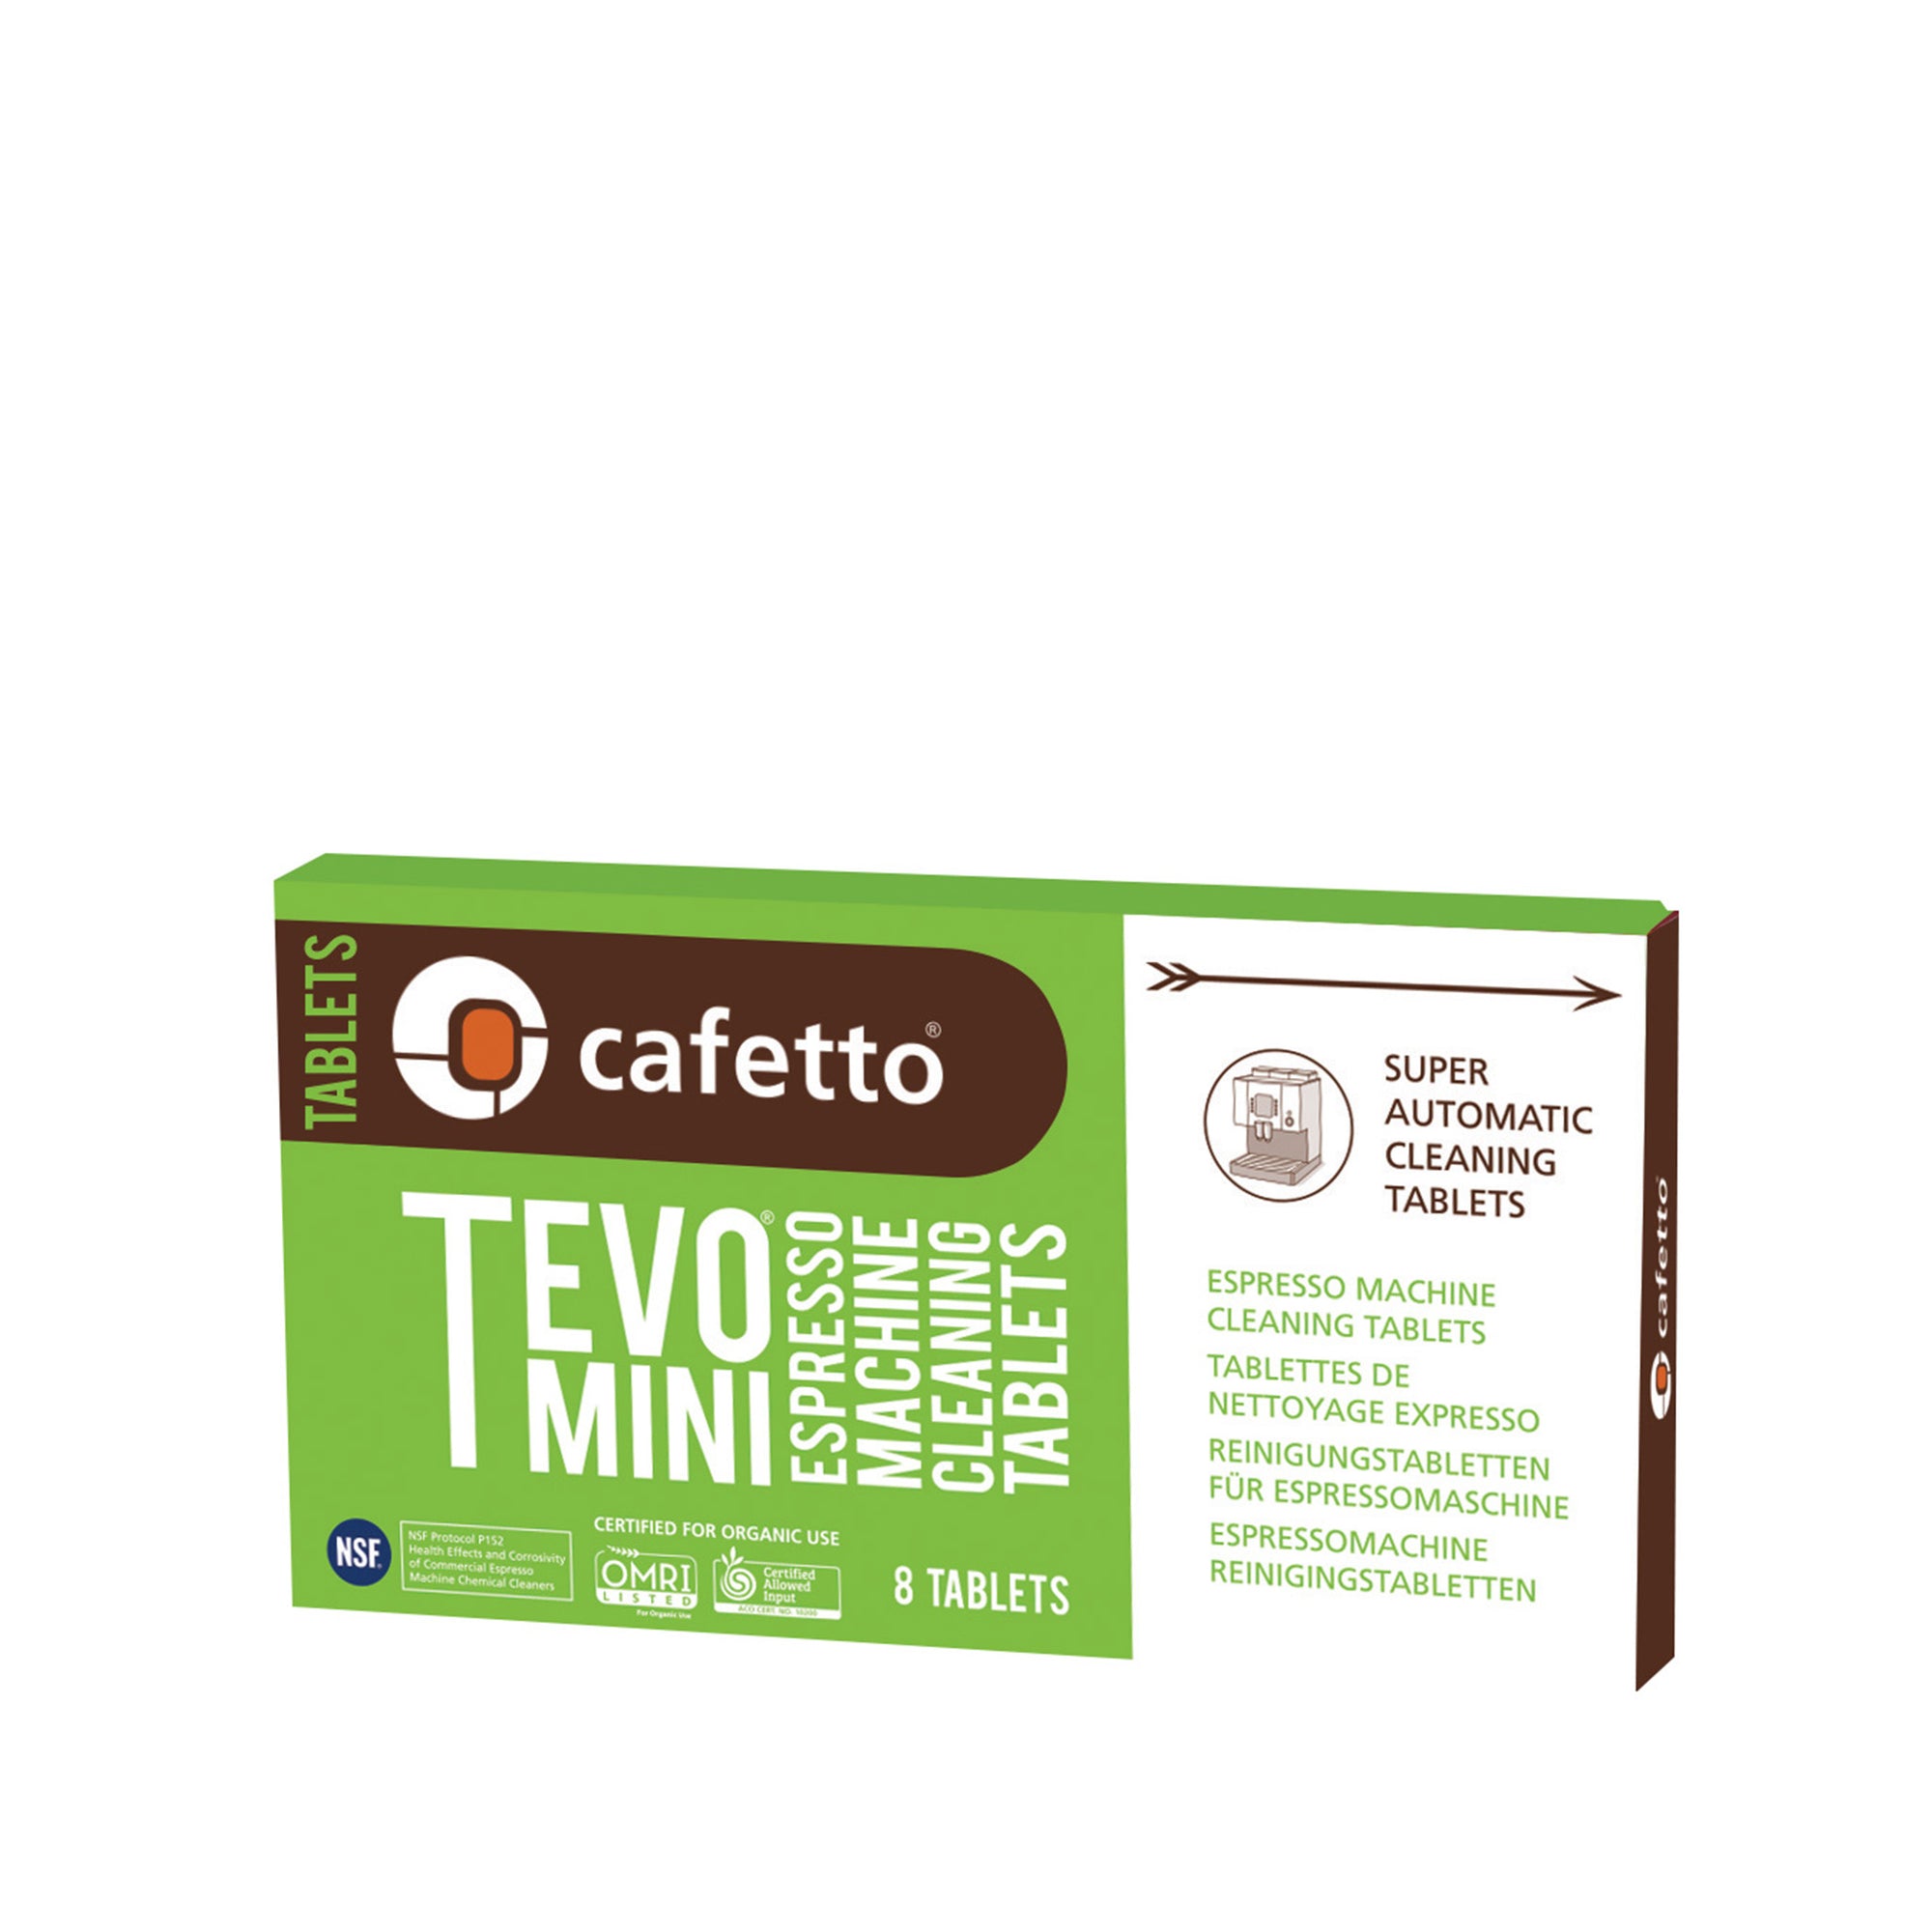 Tevo Mini Blister Pack 8 tablets - Cafetto